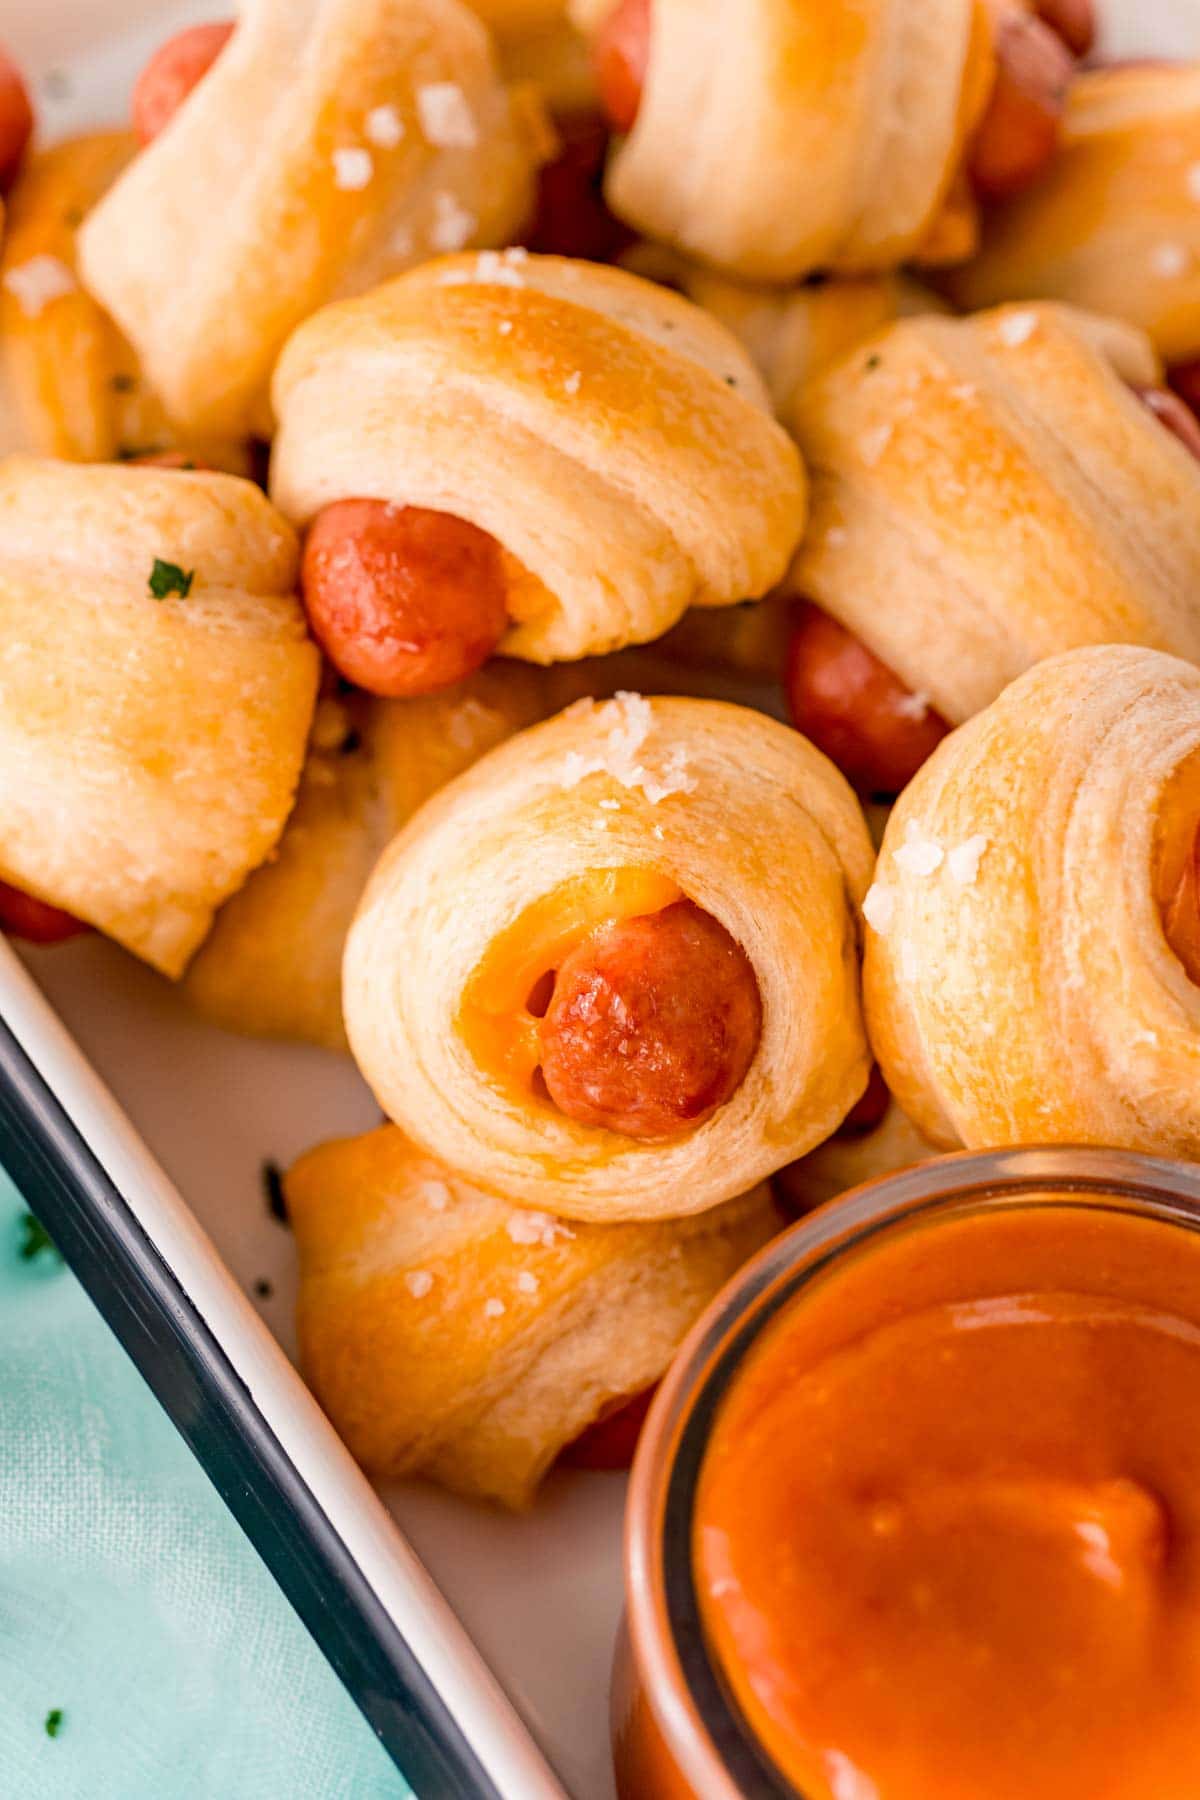 Tray full of cheddar pigs in a blanket